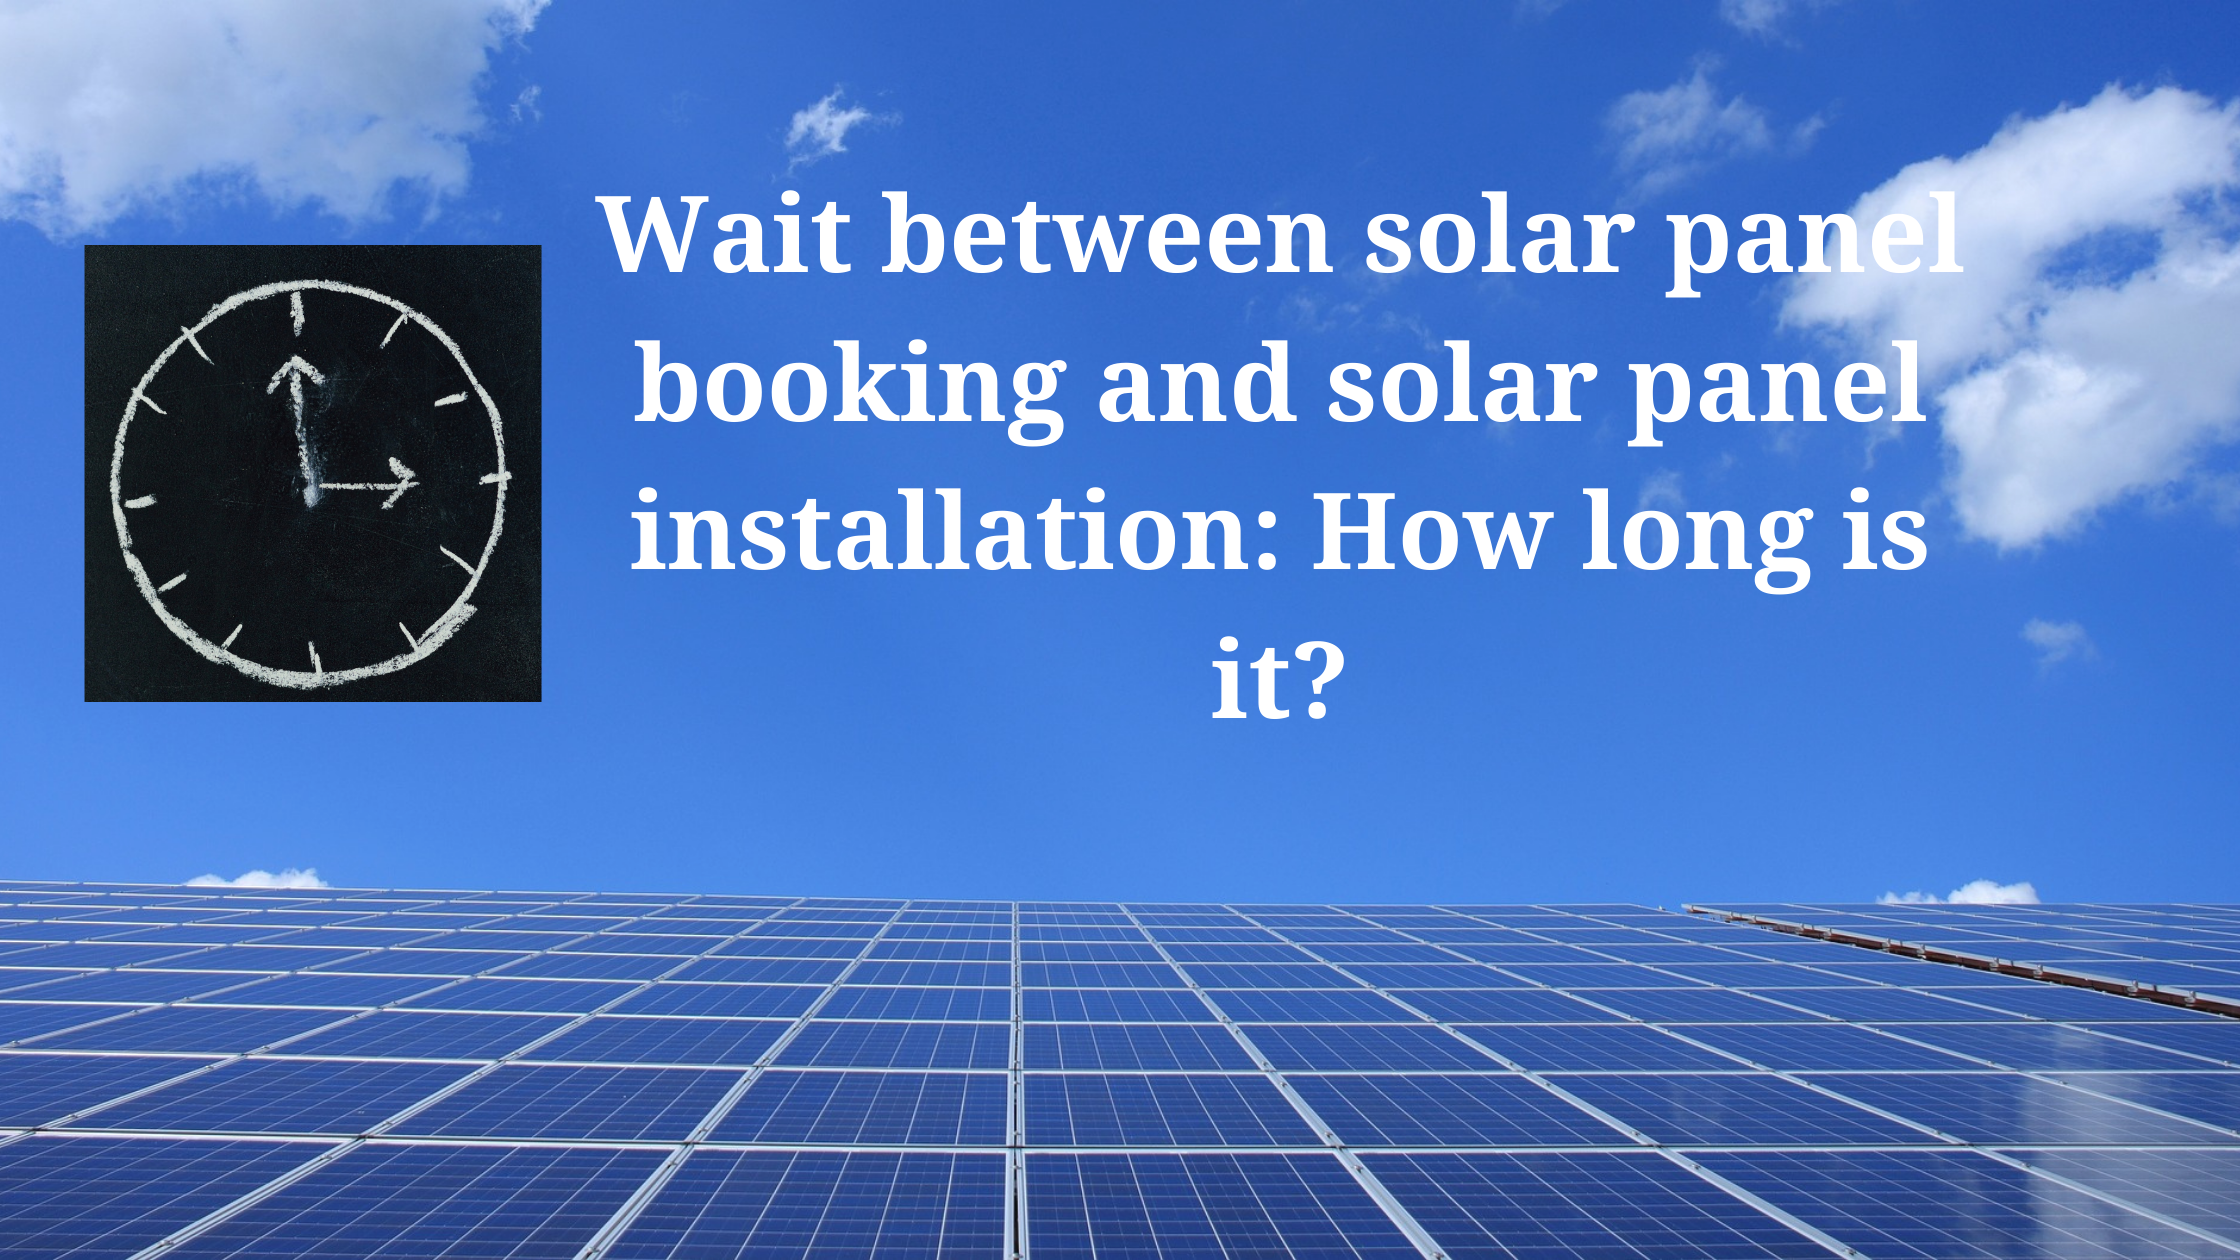 Wait between solar panel booking and solar panel installation: How long is it?